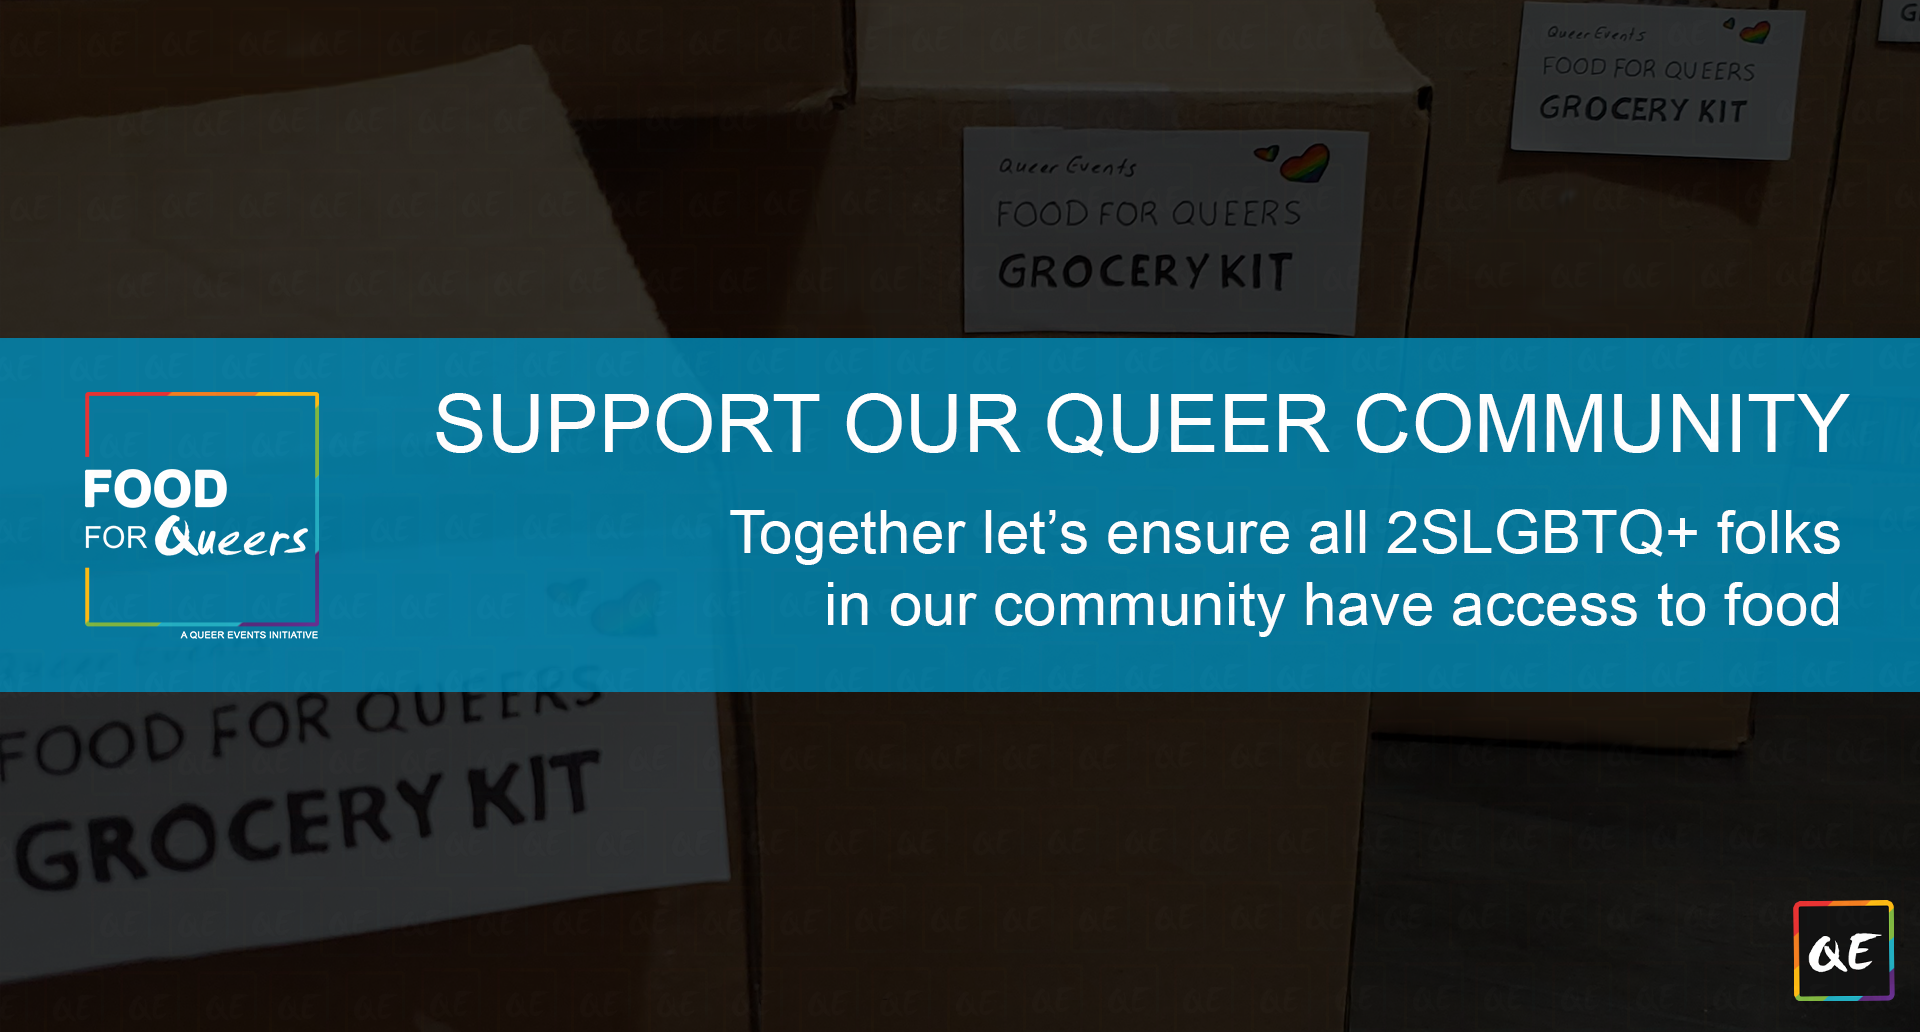 queerevents.ca program - food for queers needs support to ensure no one goes hungry